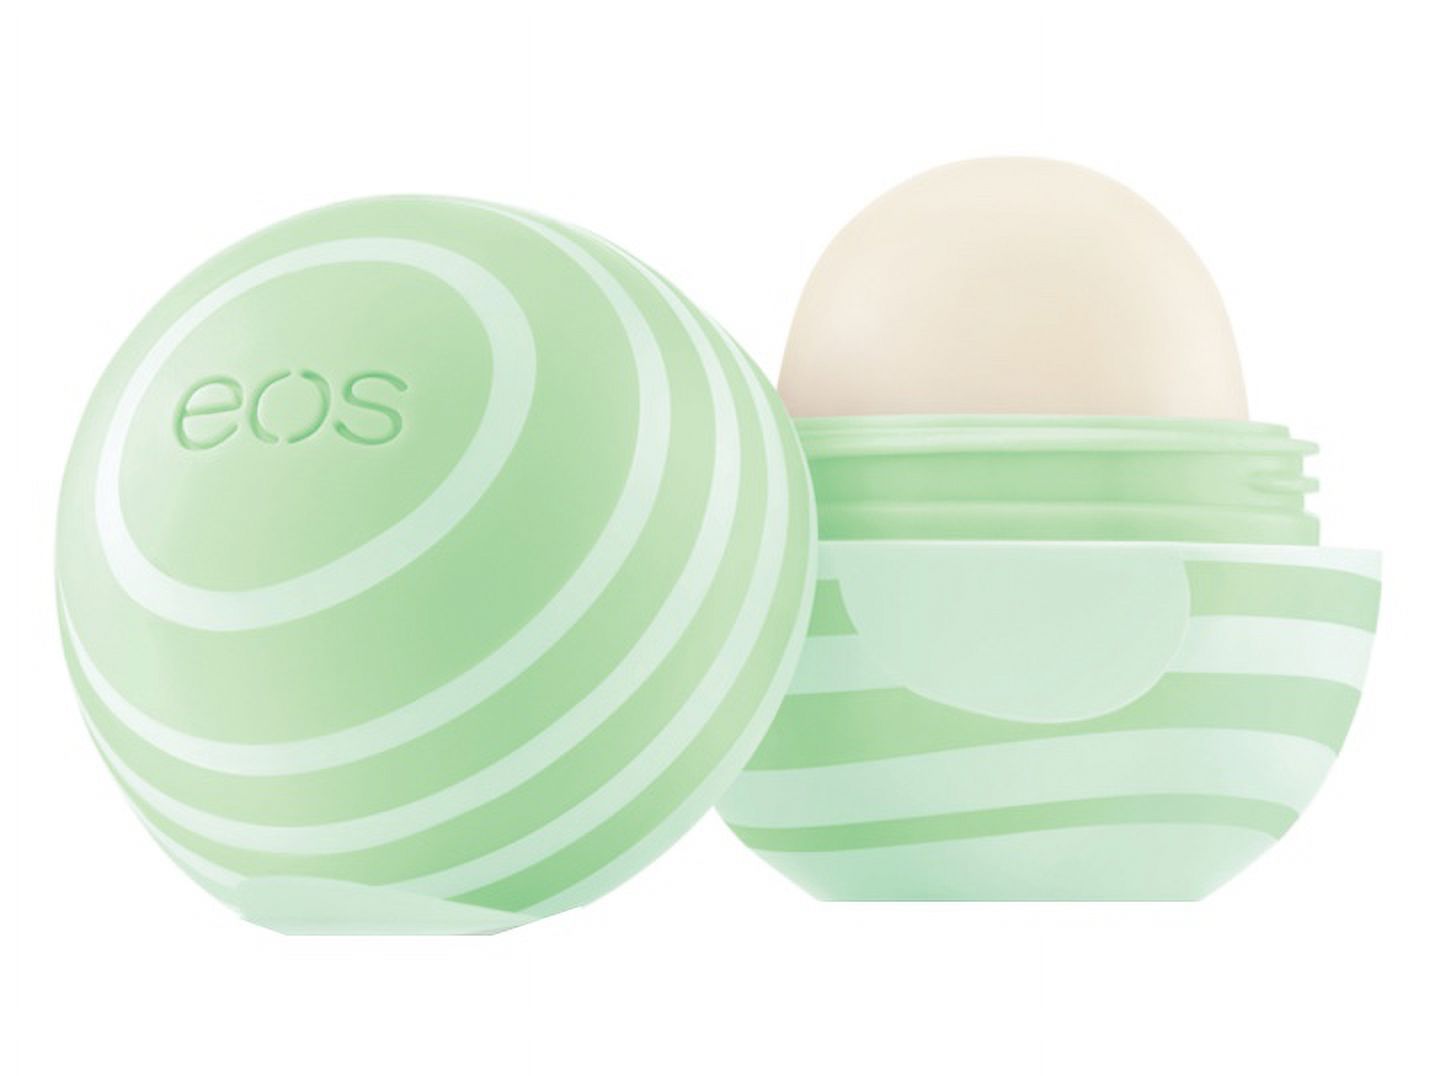 eos Visibly Soft Lip Balm, Cucumber Melon - image 1 of 4